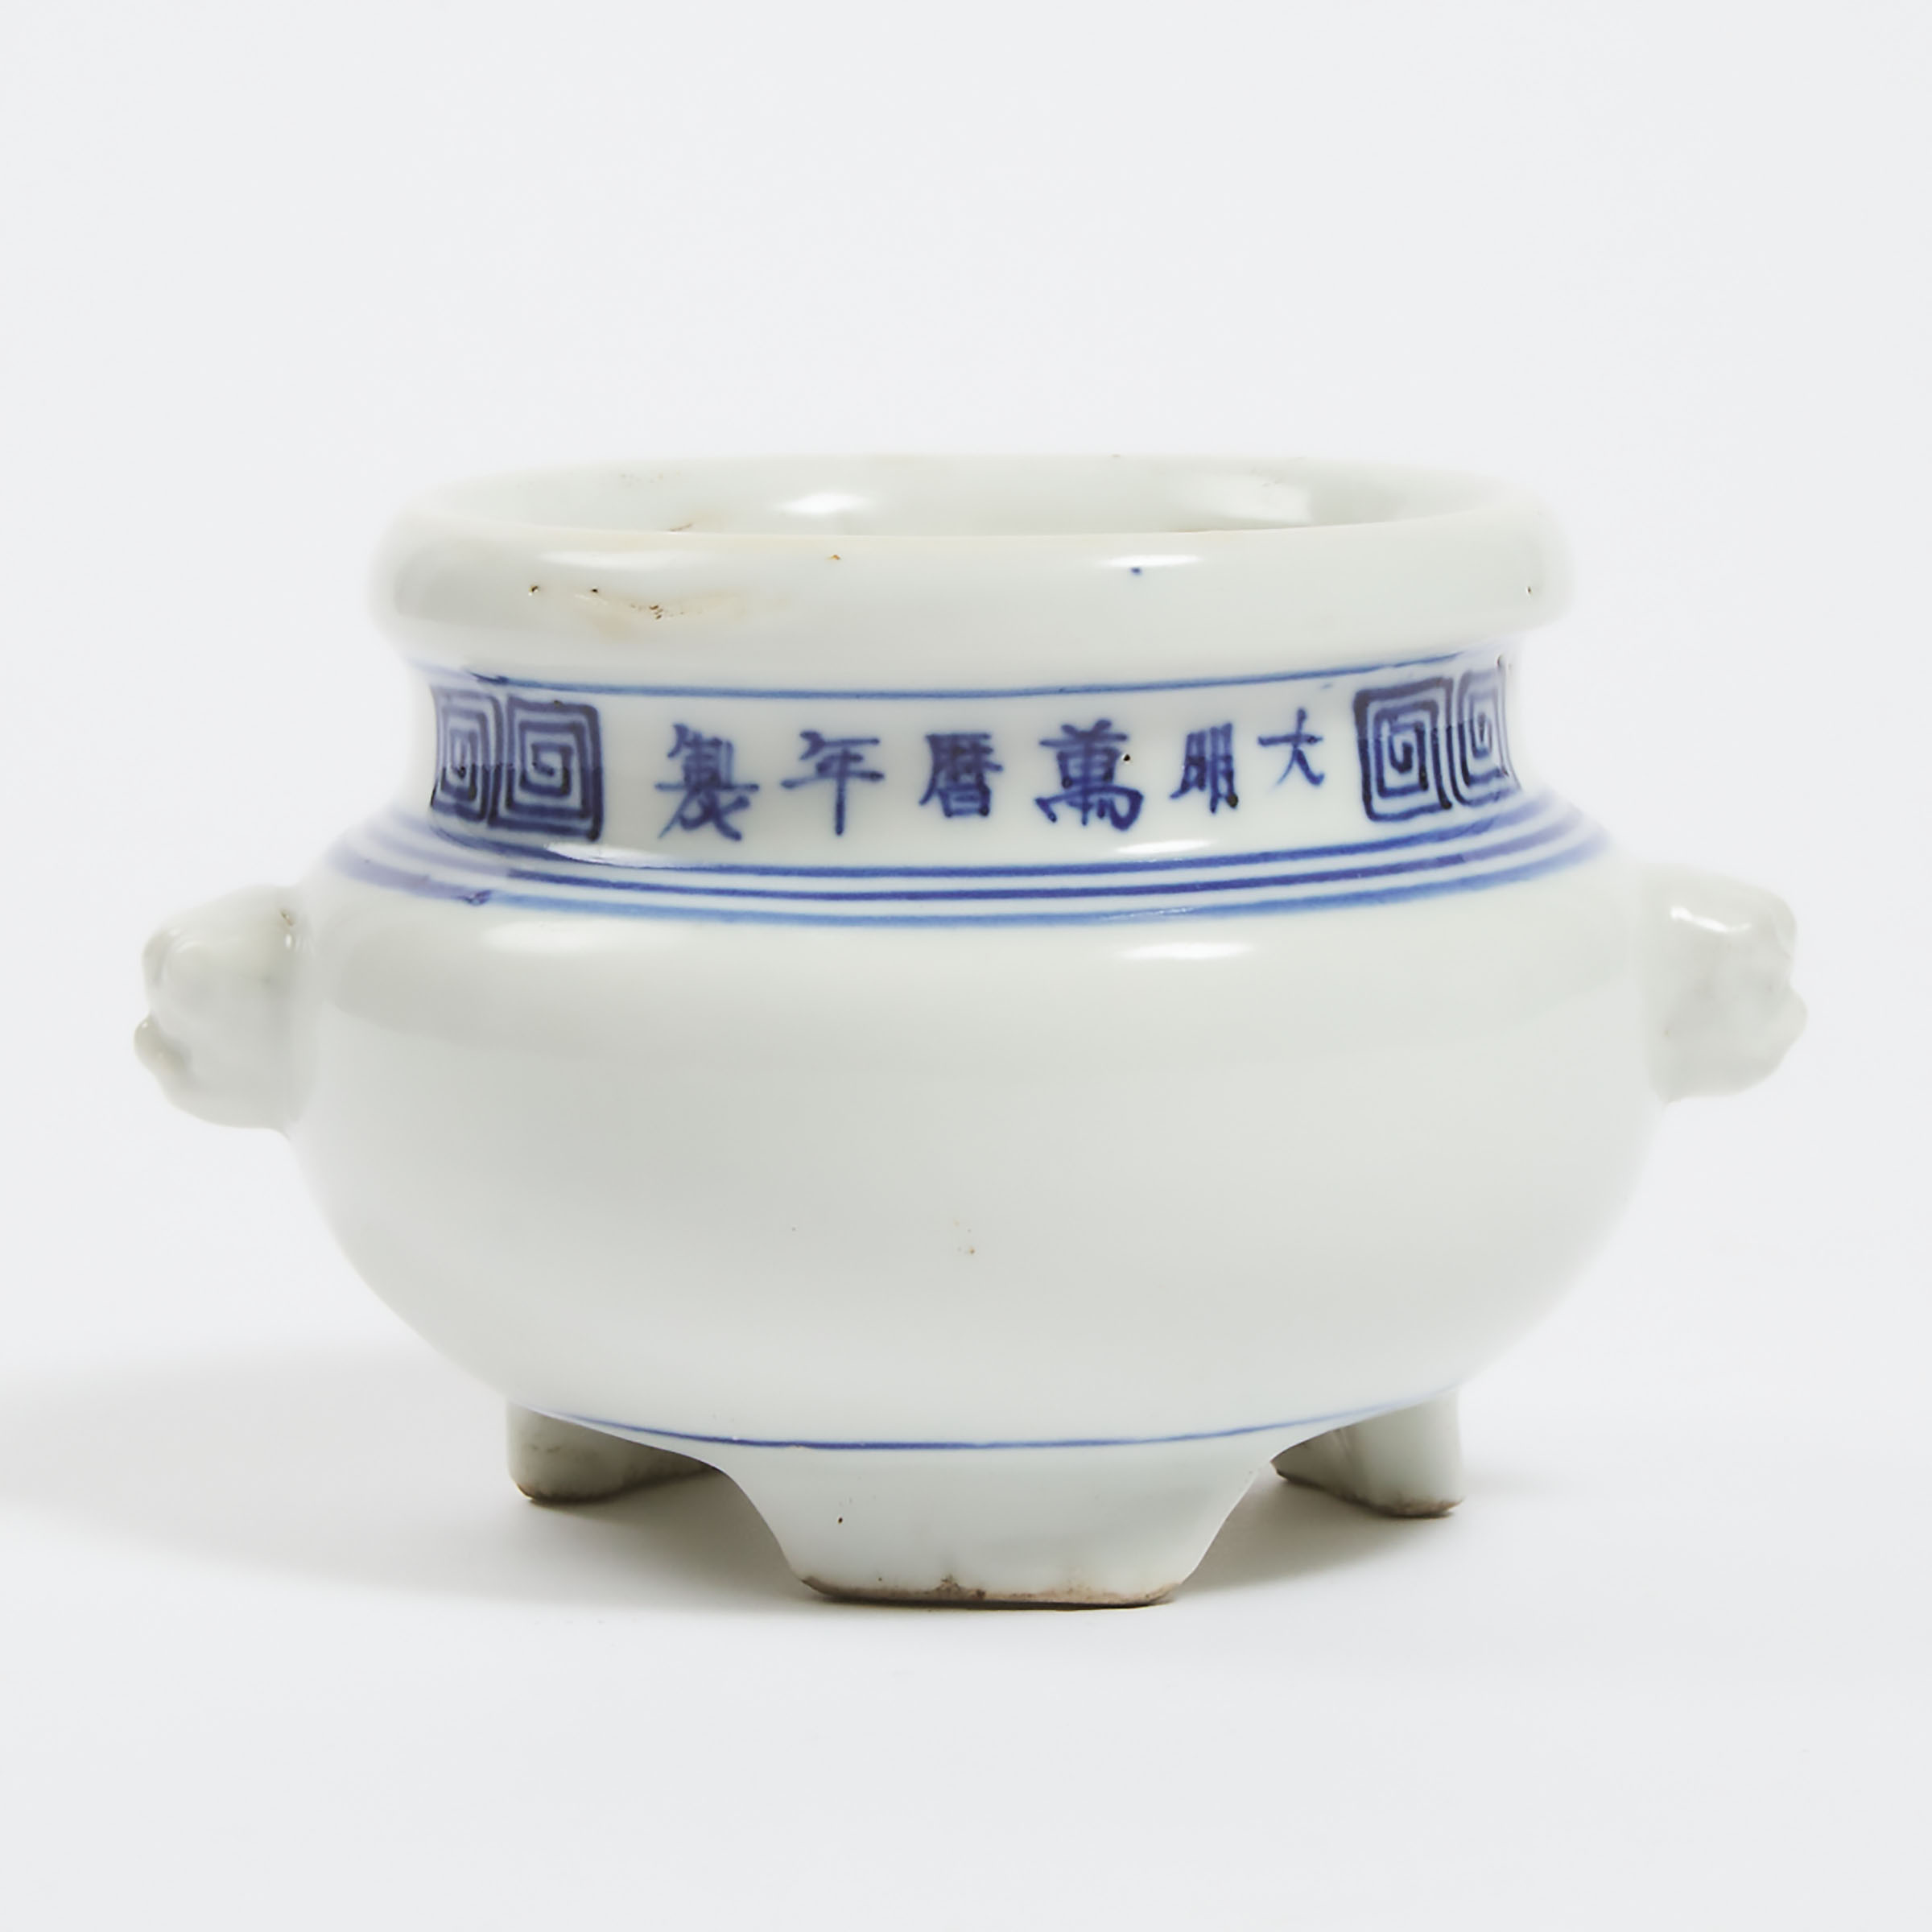 A Small Blue and White Porcelain Censer, Wanli Mark, Early 20th Century